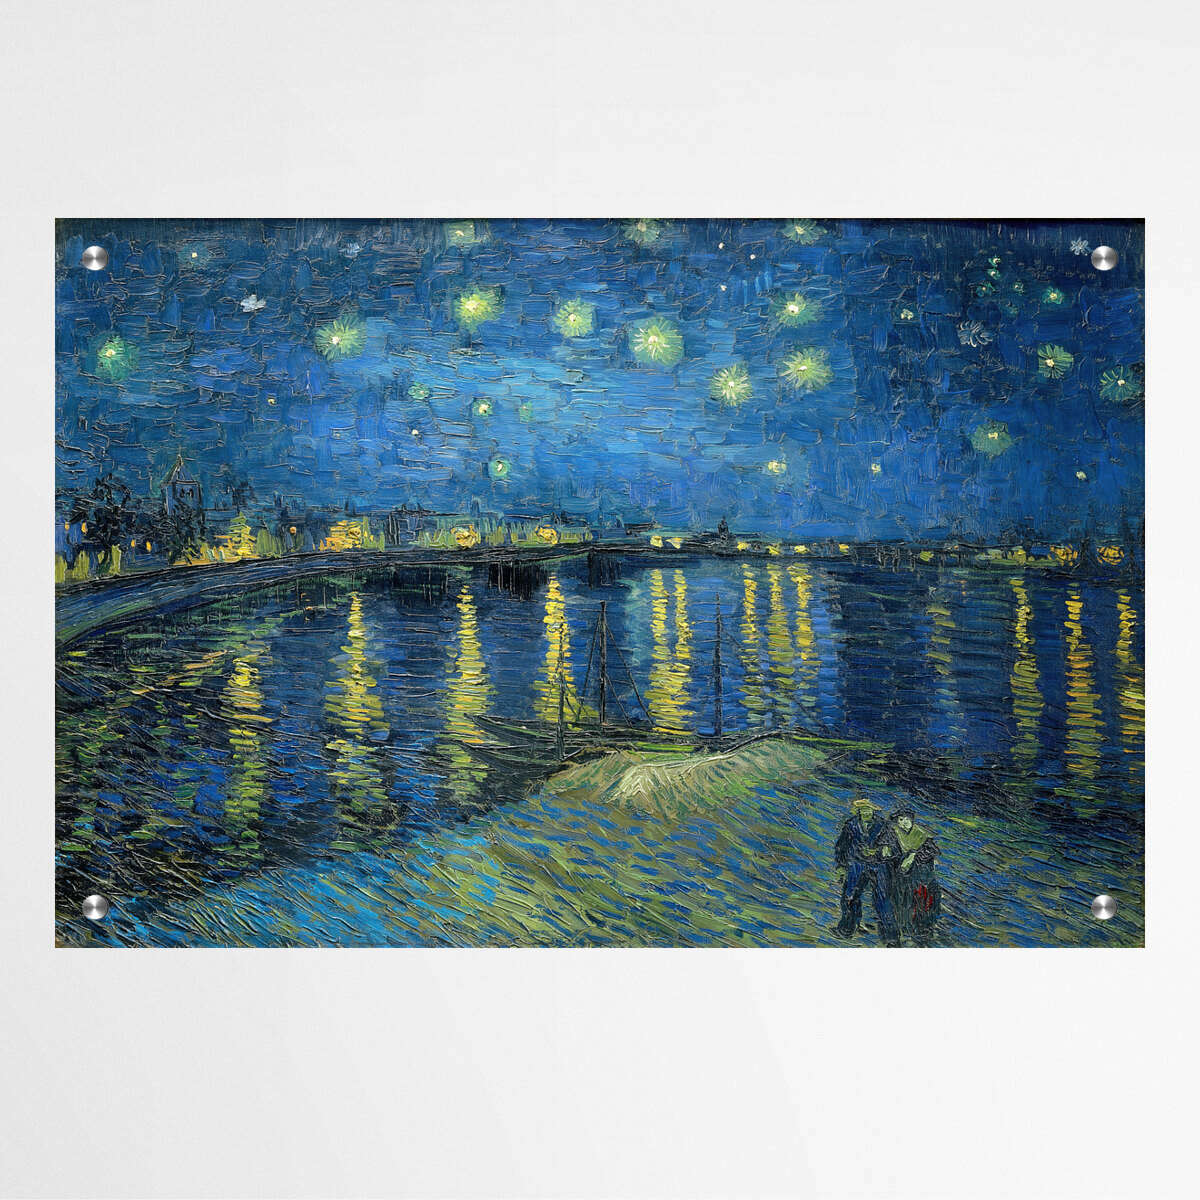 Vincent van Gogh's Starry Night Over the Rhone | Famous Paintings Wall Art Prints - The Canvas Hive